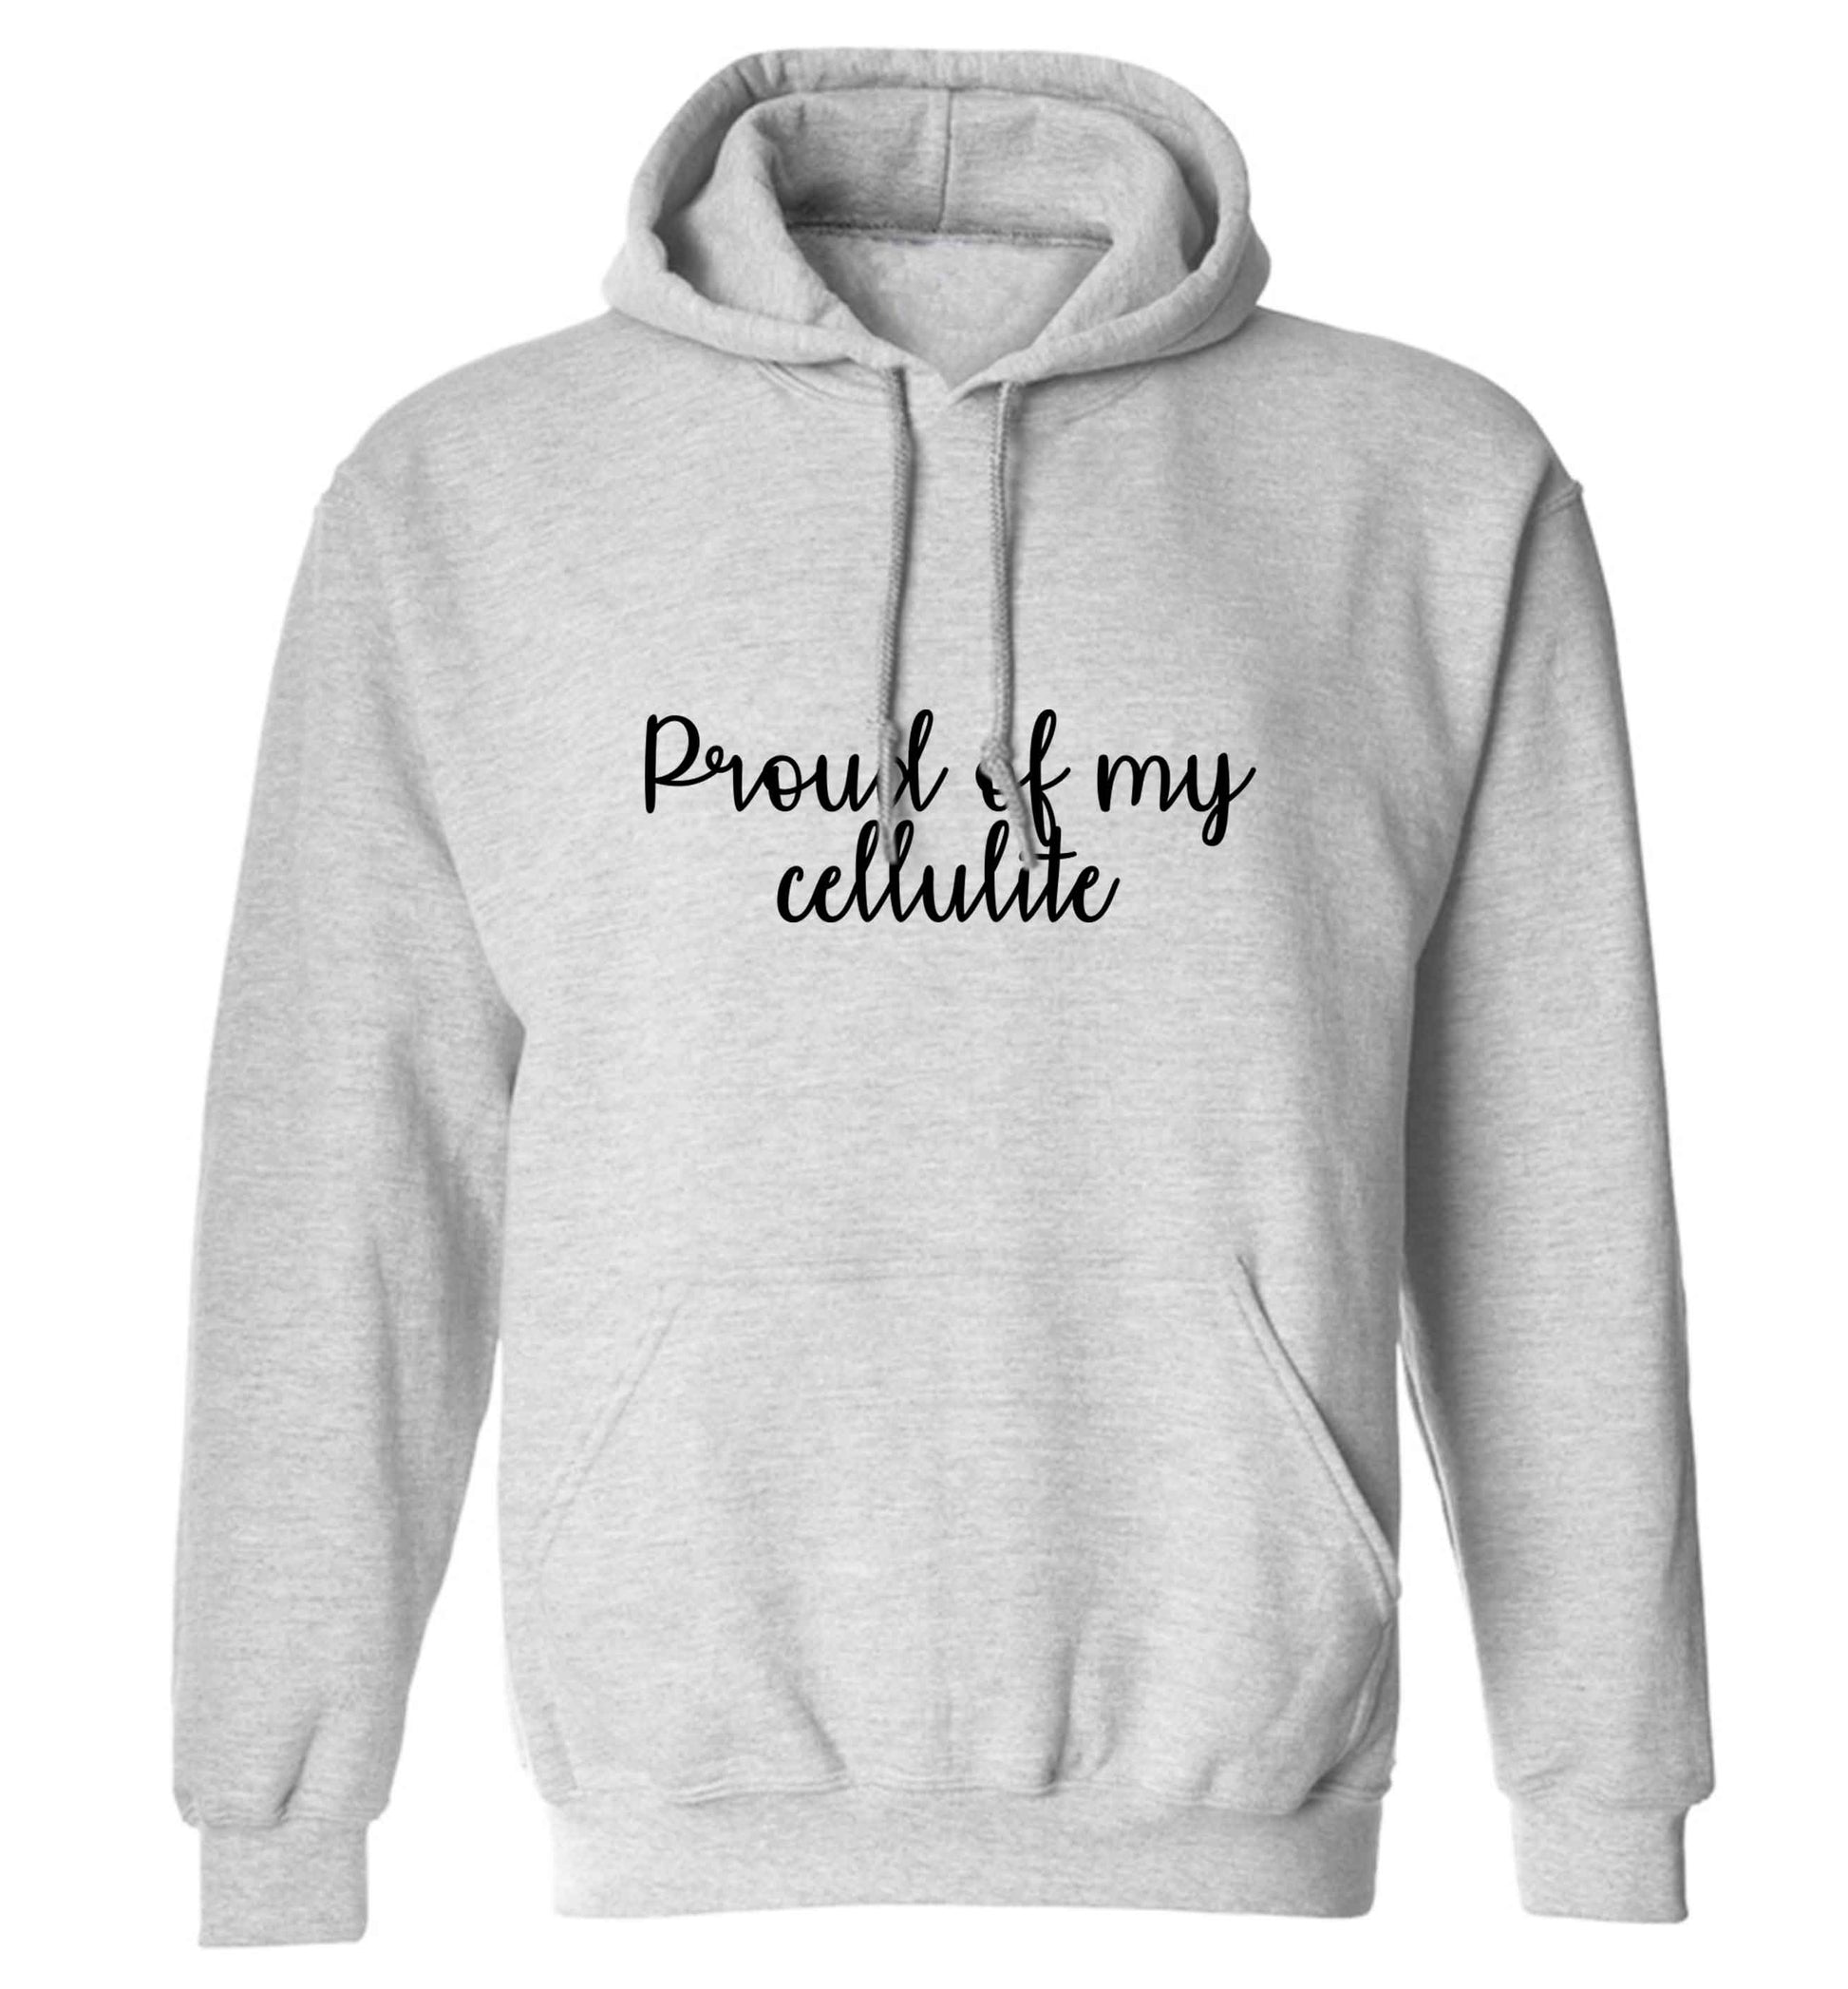 Proud of my cellulite adults unisex grey hoodie 2XL